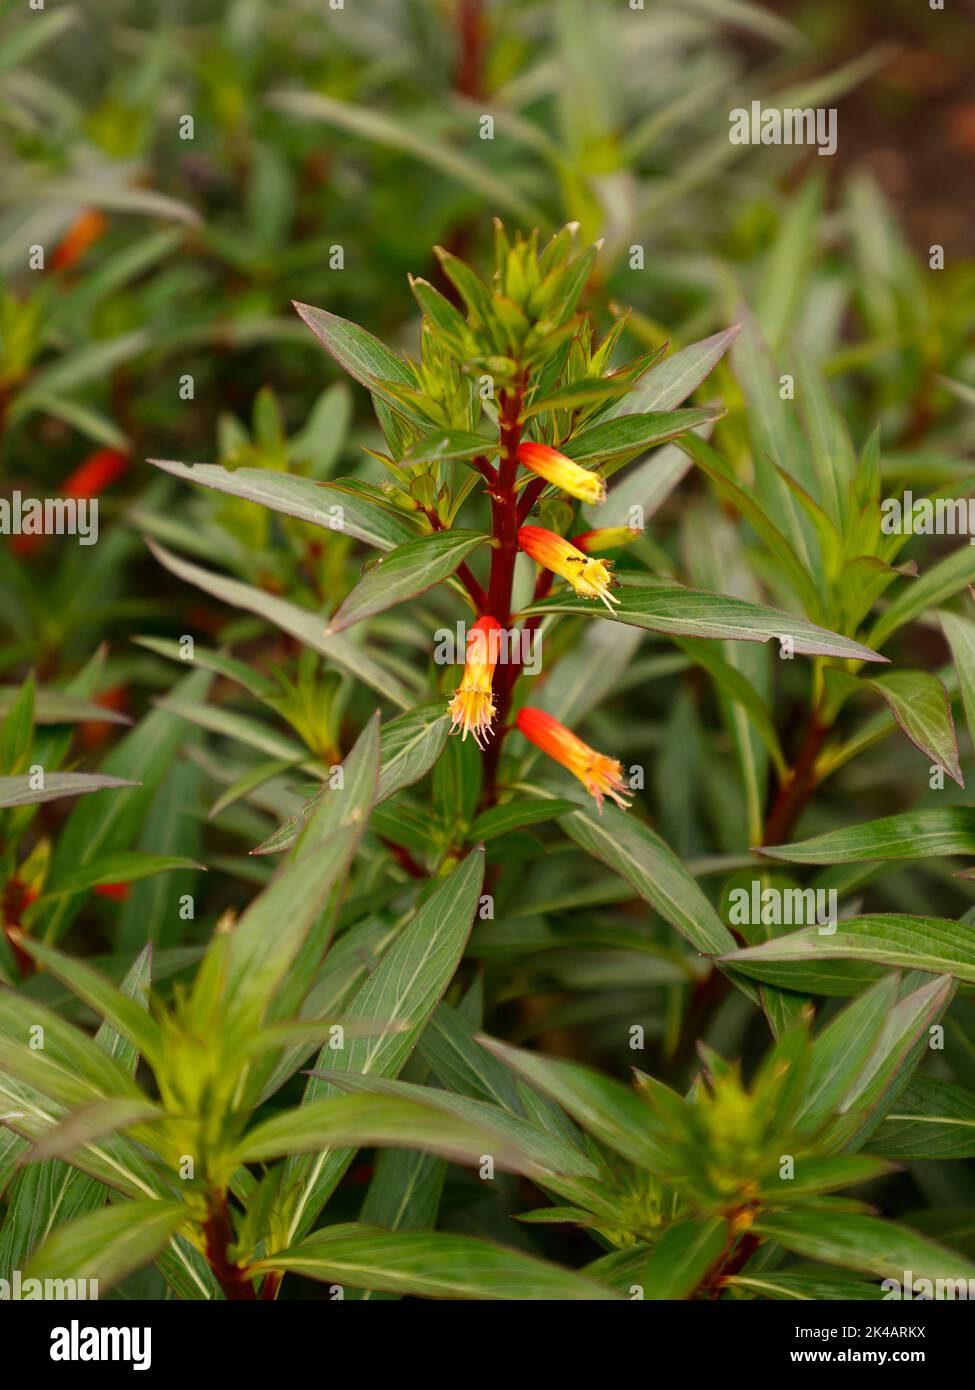 Close up of the summer flowering herbaceous perennial garden plant Cuphea melvila with yellow-orange tubular flowers in the UK. Stock Photo